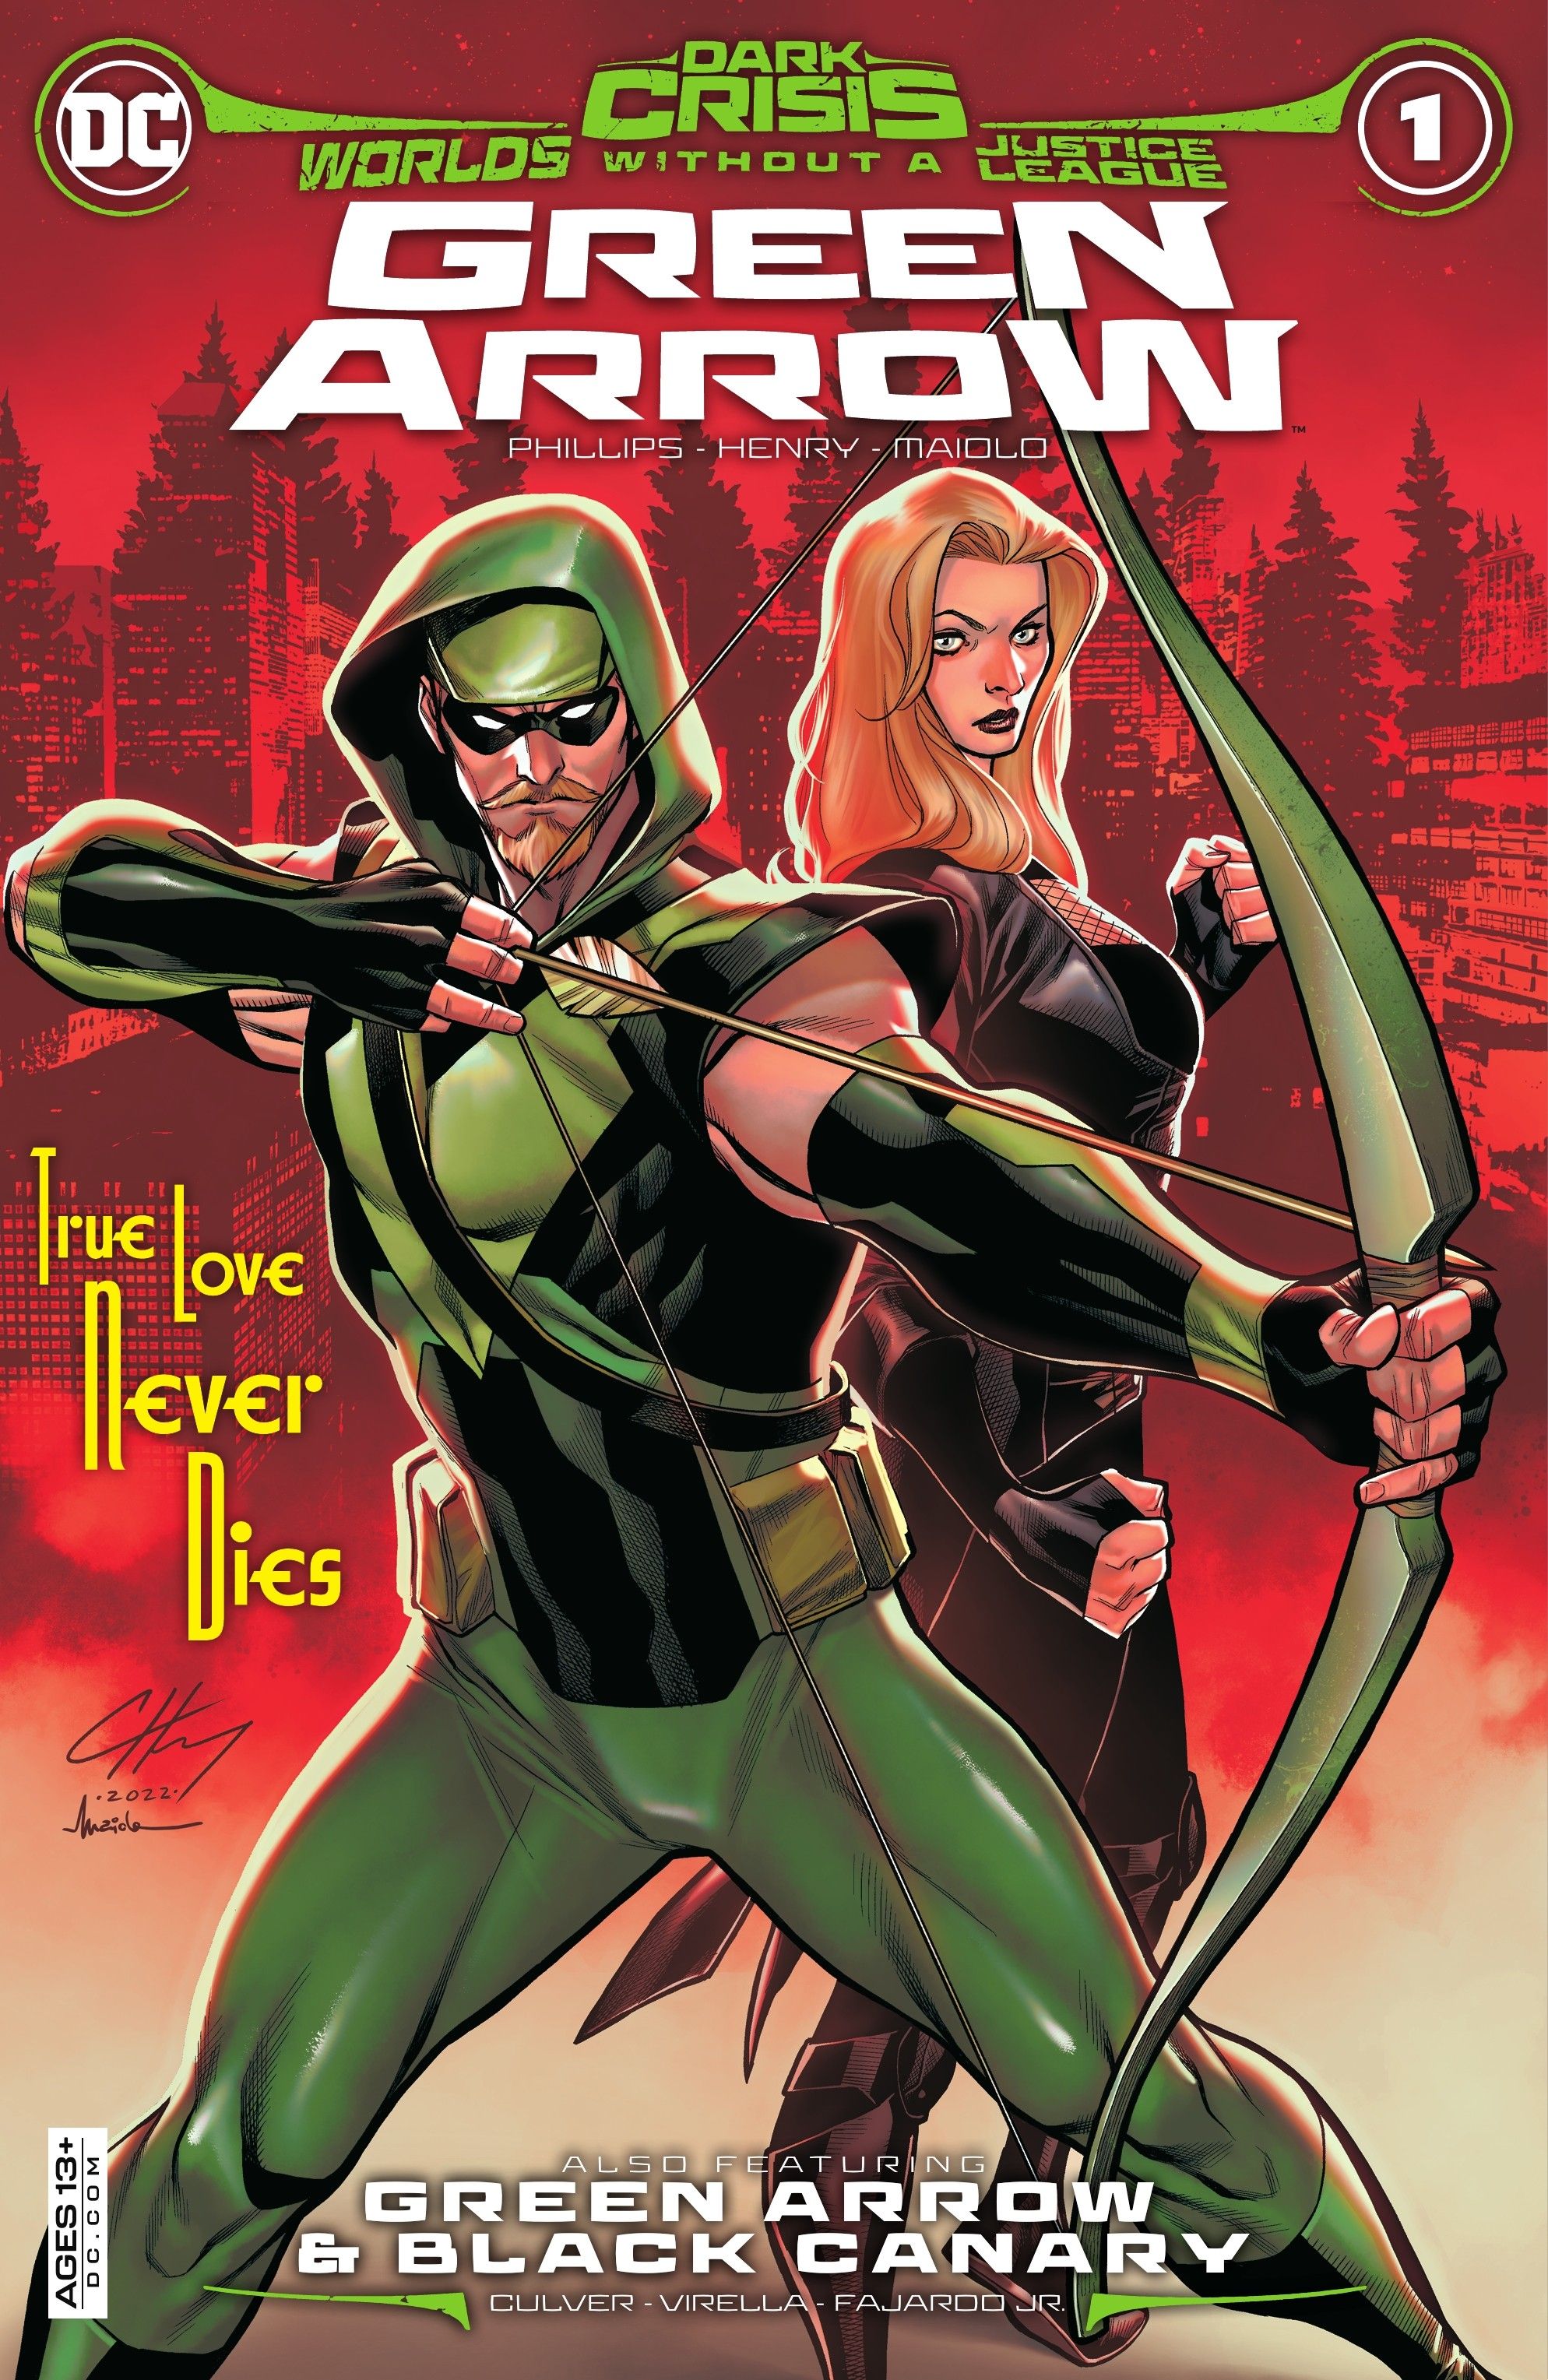 Dark Crisis Worlds Without A Justice League - Green Arrow #1 Cover